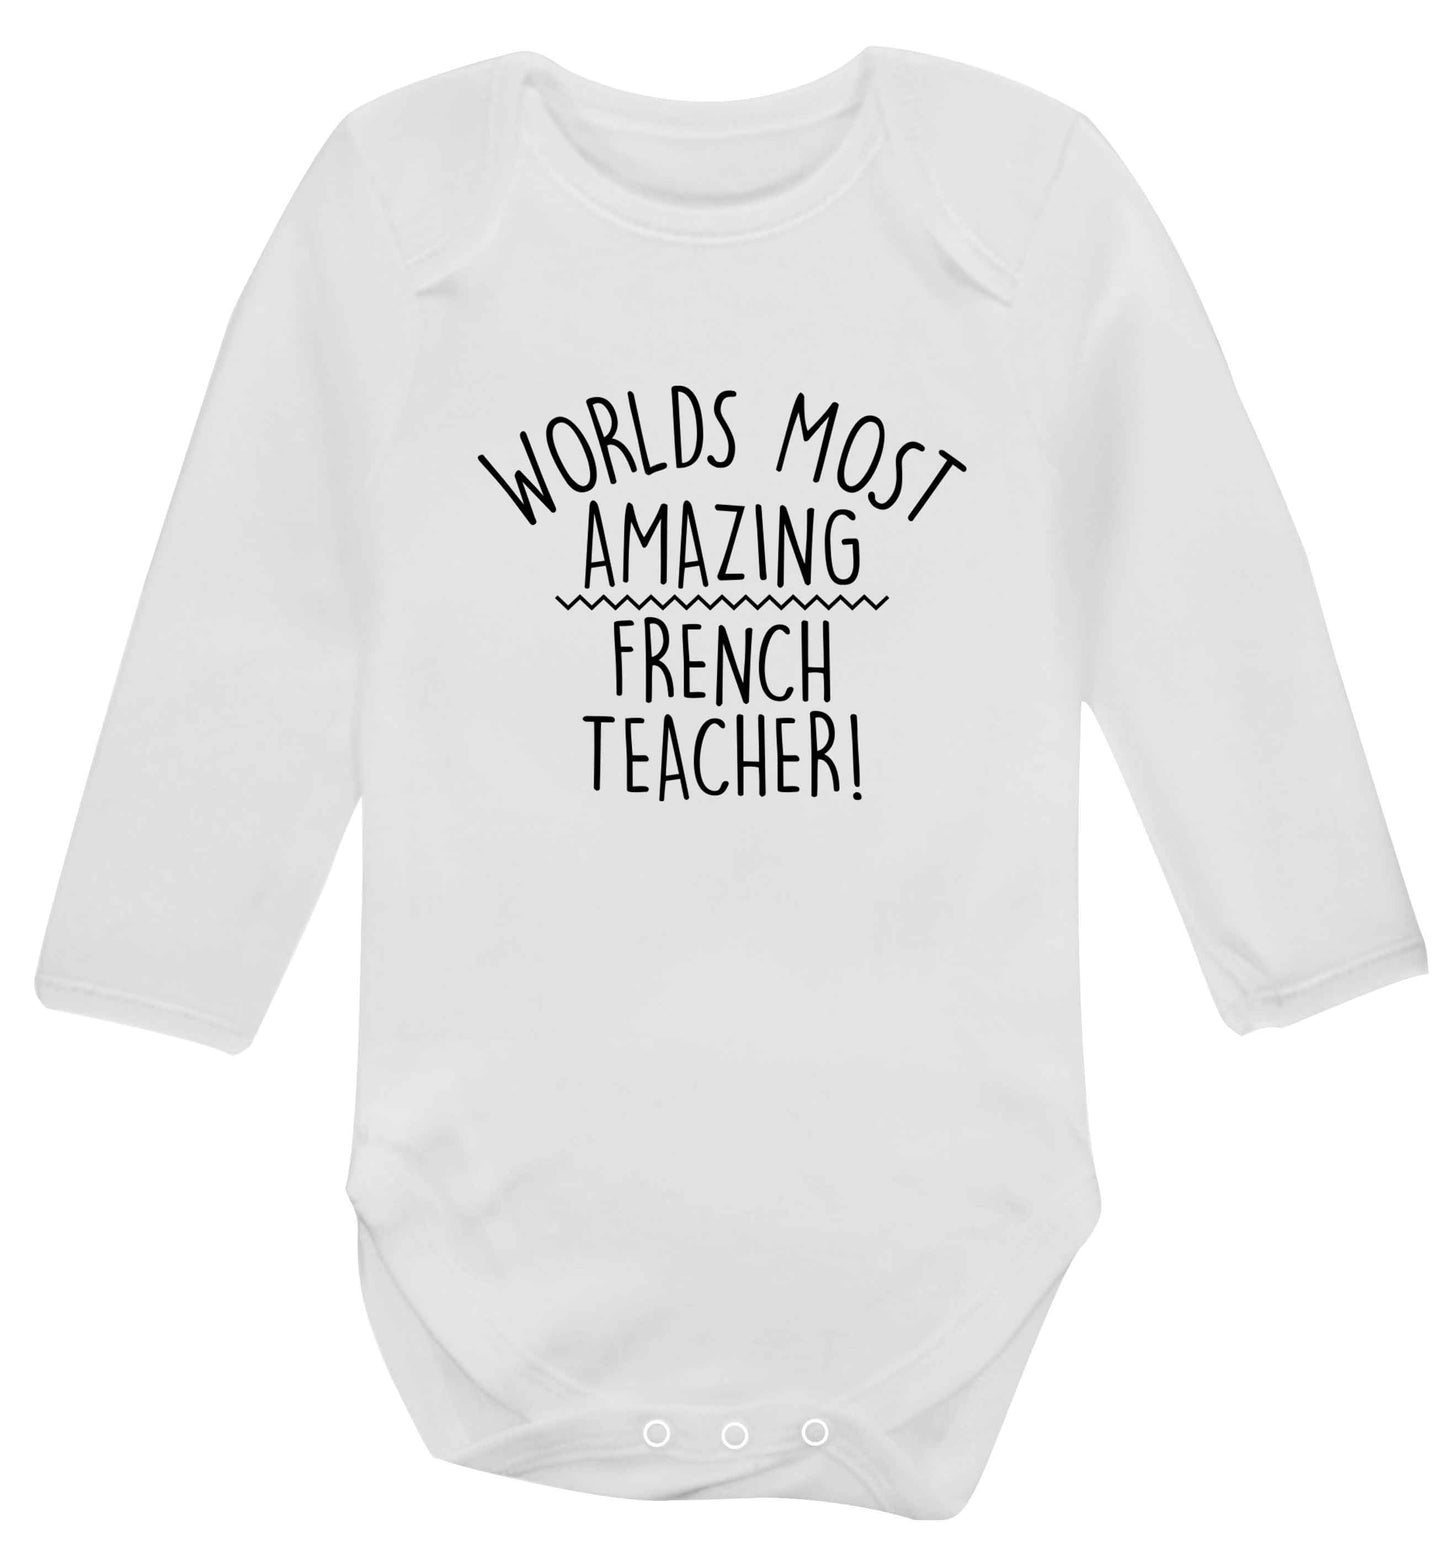 Worlds most amazing French teacher baby vest long sleeved white 6-12 months